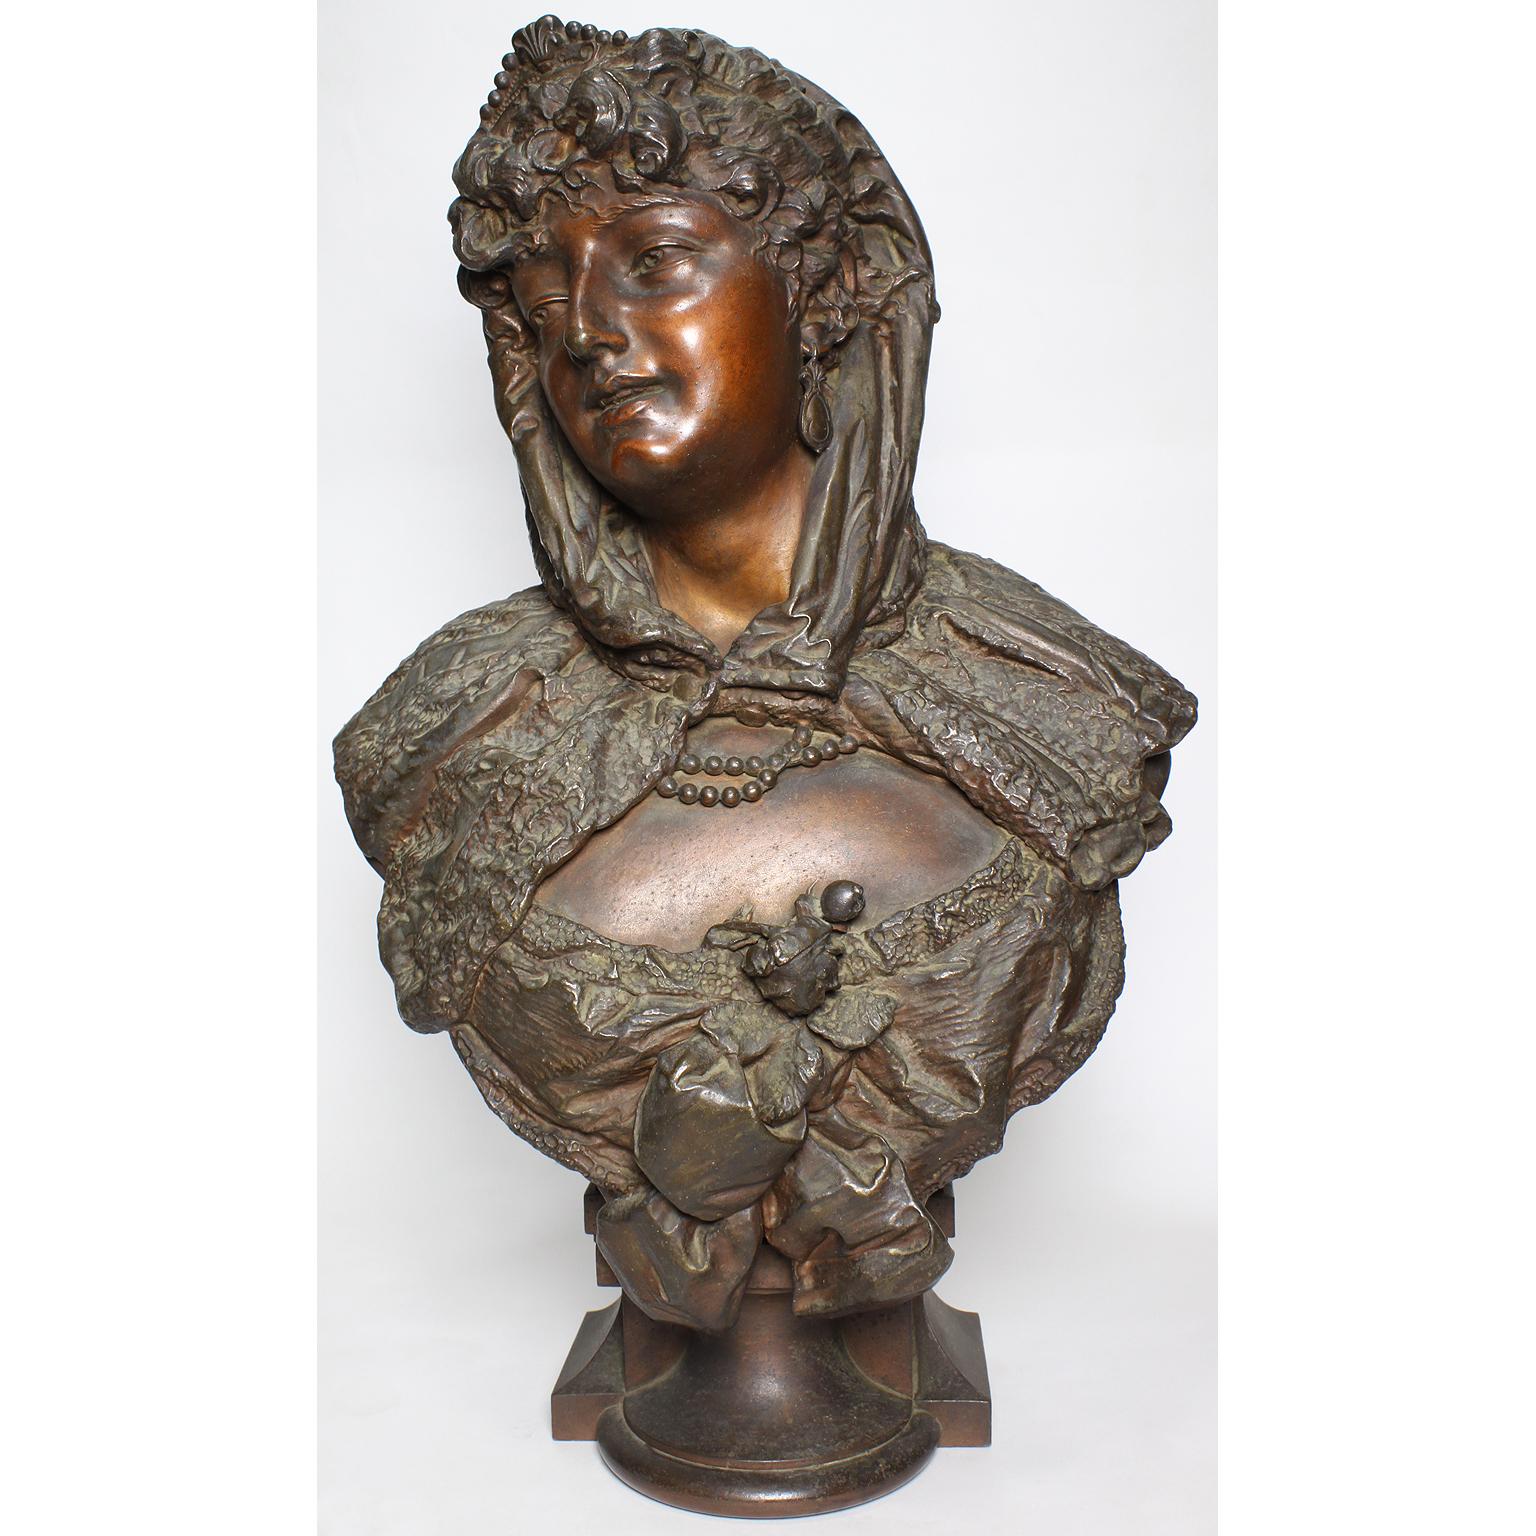 A fine French 19th century patinated spelter bust figure of a young wearing a head scarf. The young lady, in a brown-copper patina, posing with a right-side gaze and wearing a beaded necklace and a flower to her cleavage. Attributed to Louis Hottot